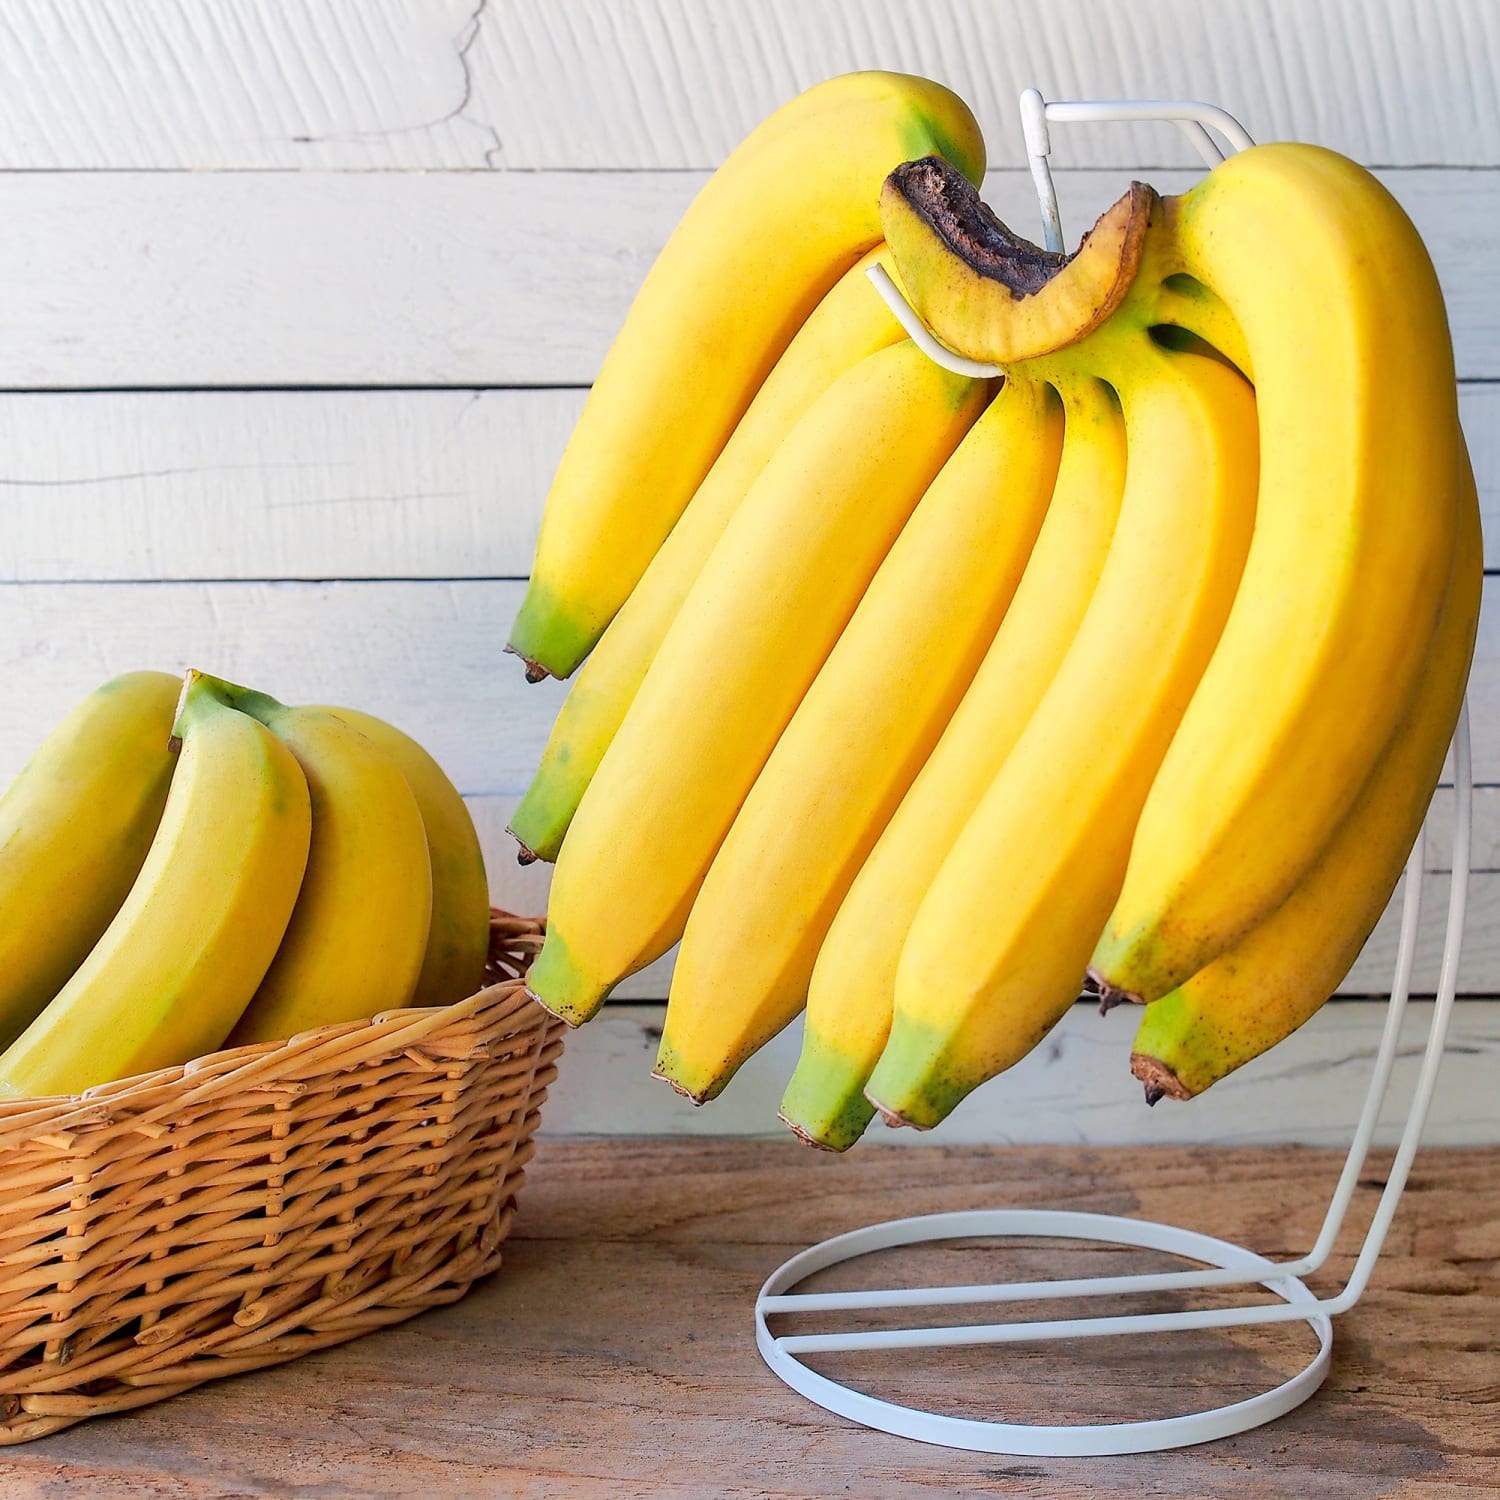 How to Prevent Bananas from Ripening: Keep away from direct sunlight